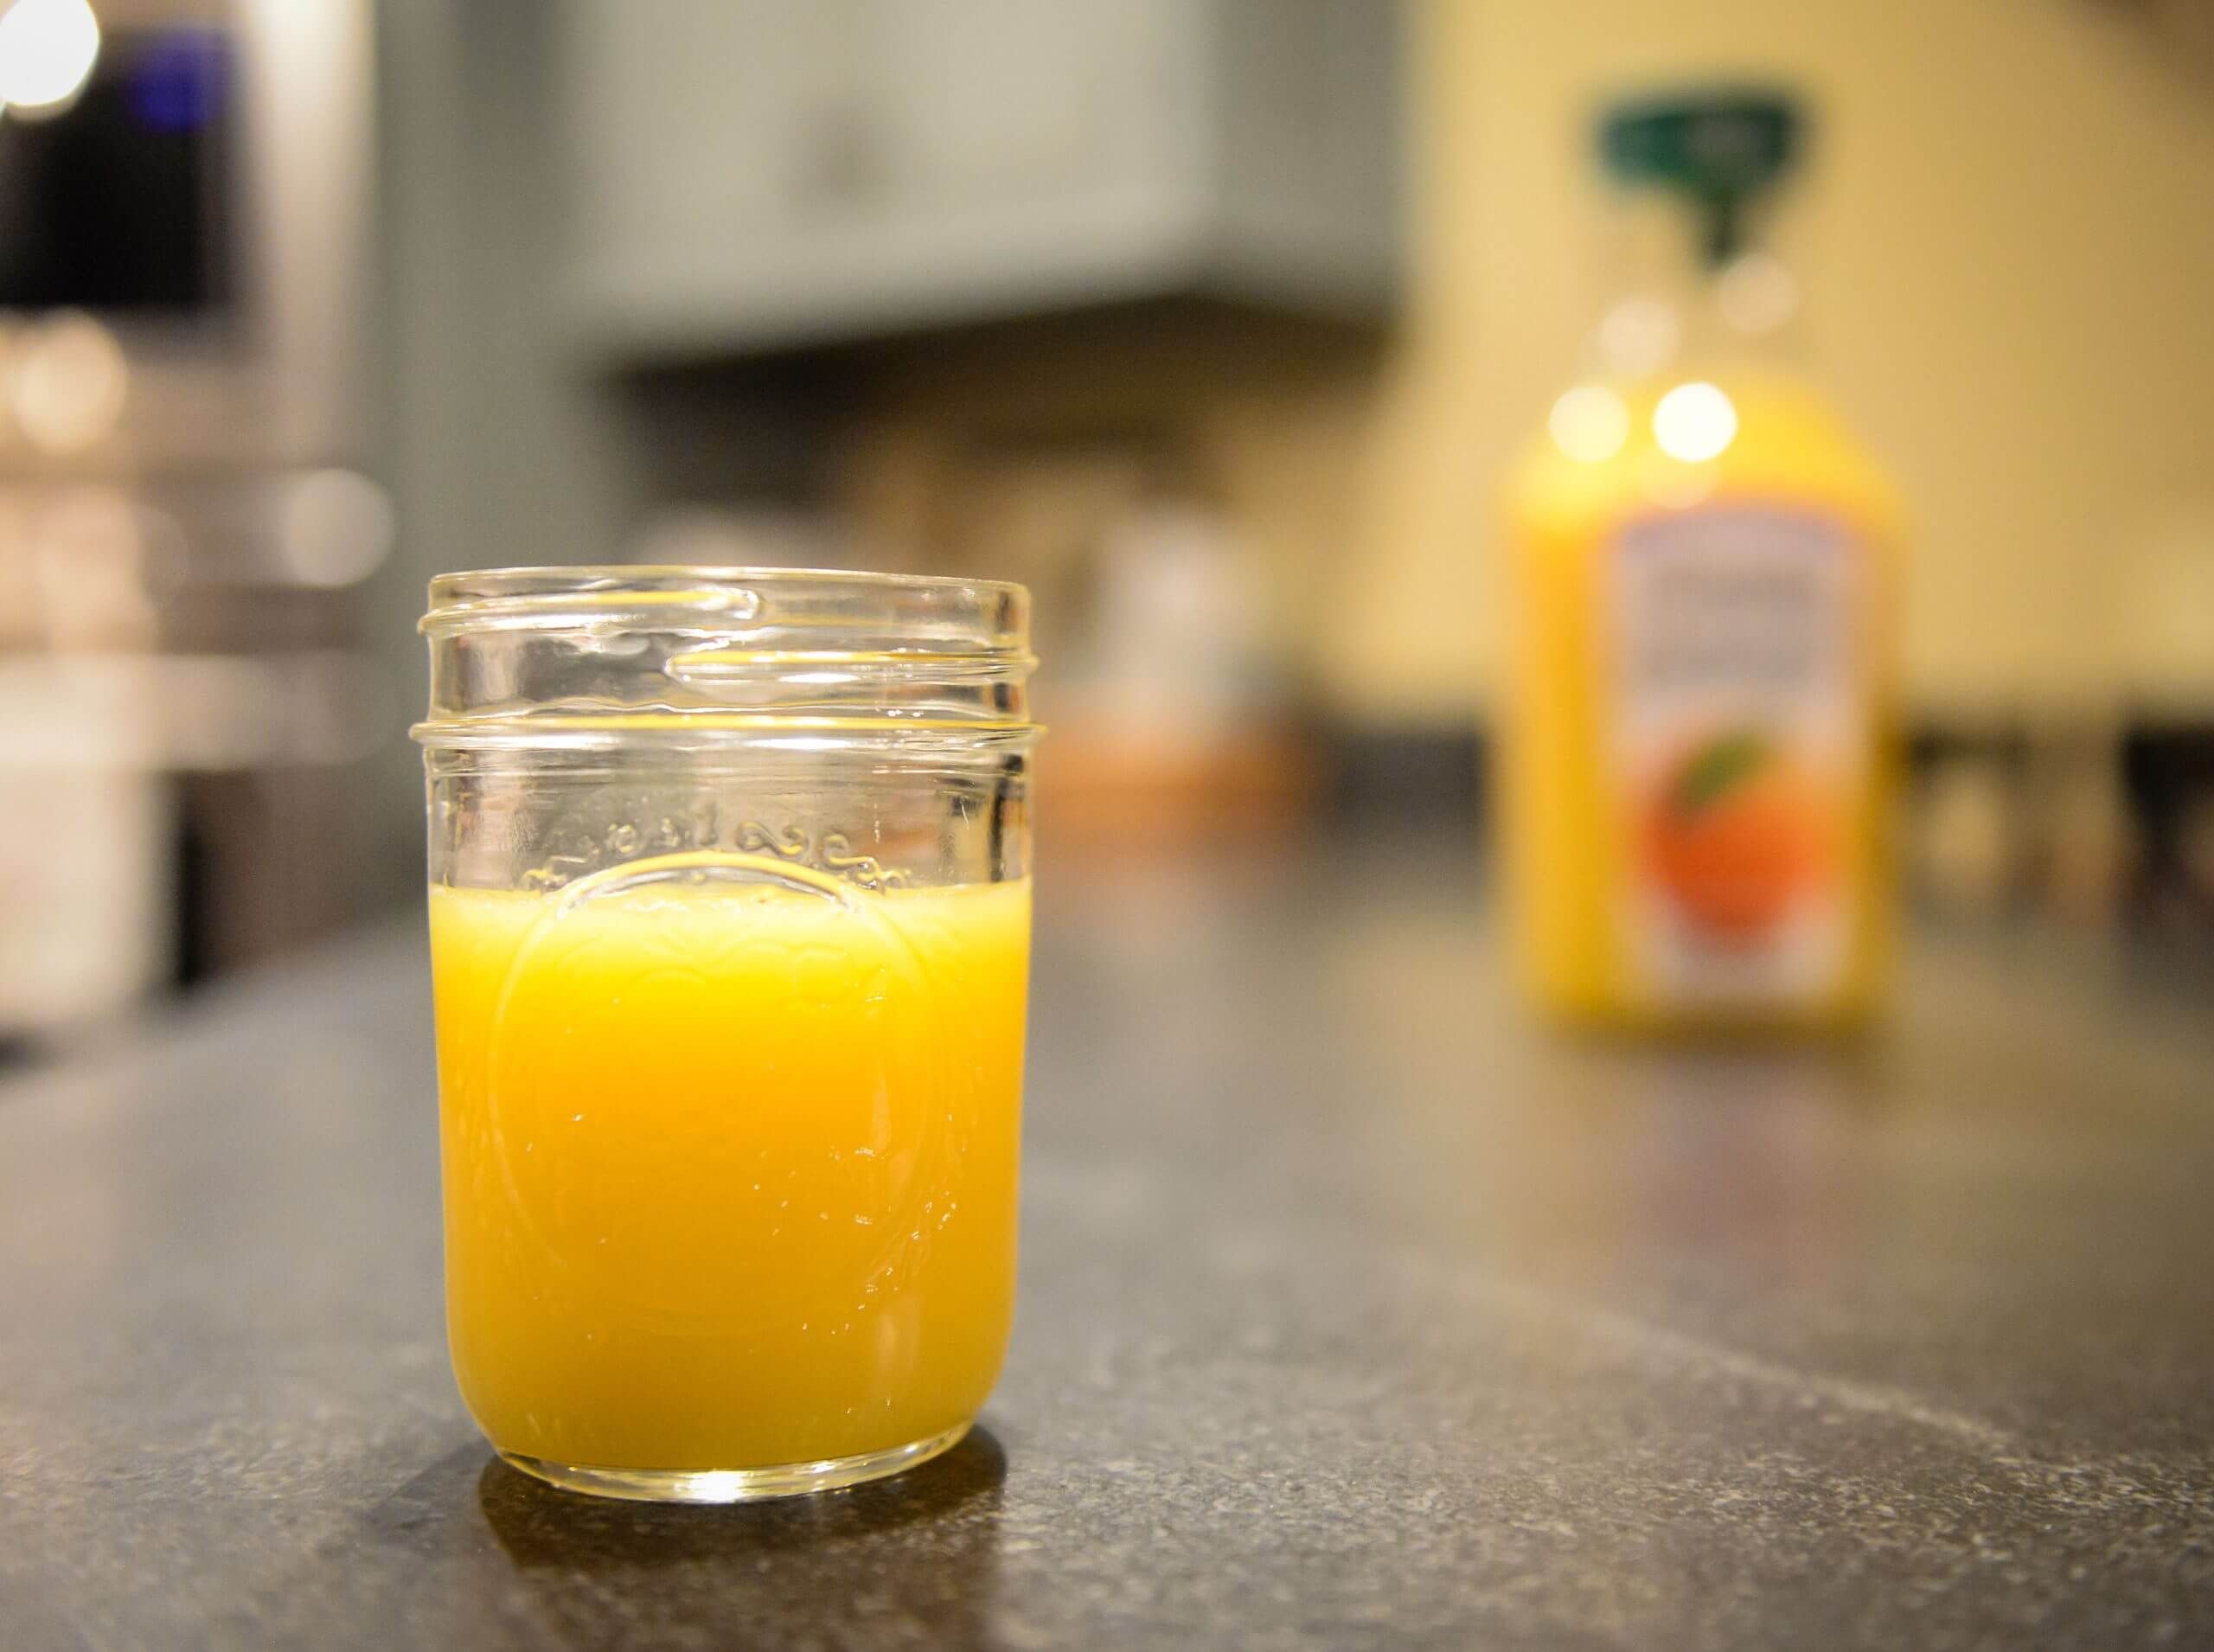 A focused view of a glass of orange juice on a counter, in front of an unfocused view of the container of orange juice.